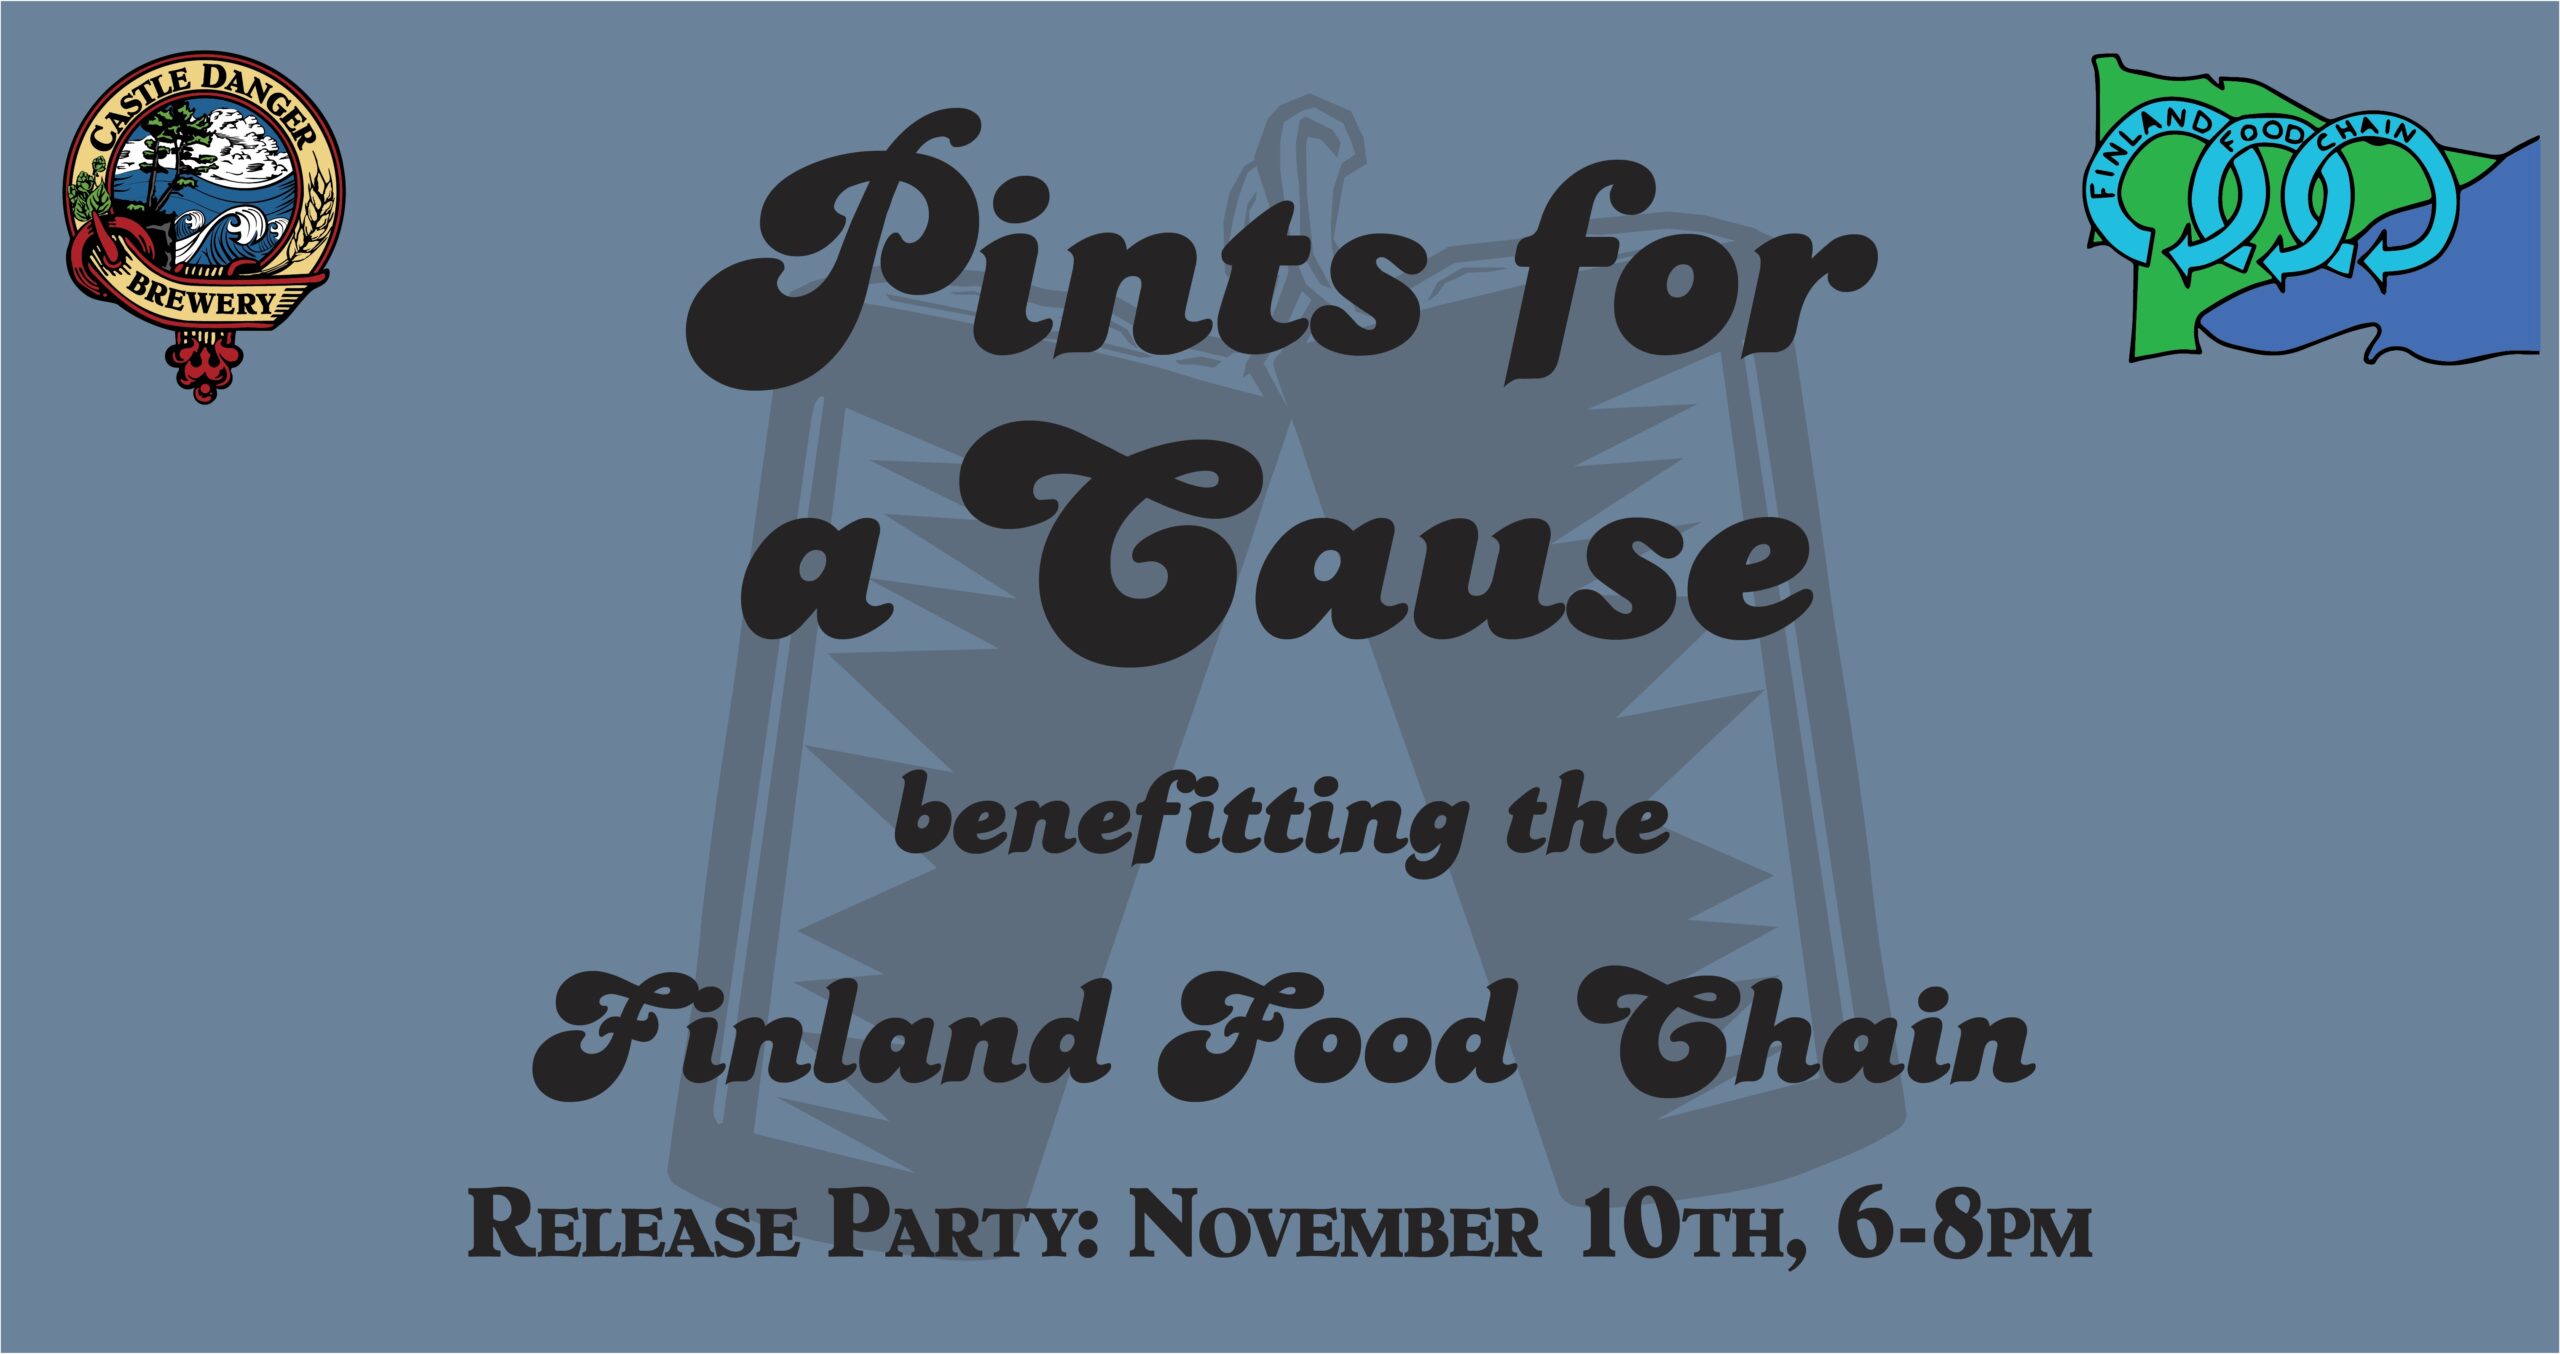 information about the upcoming pints for a cause beer release party